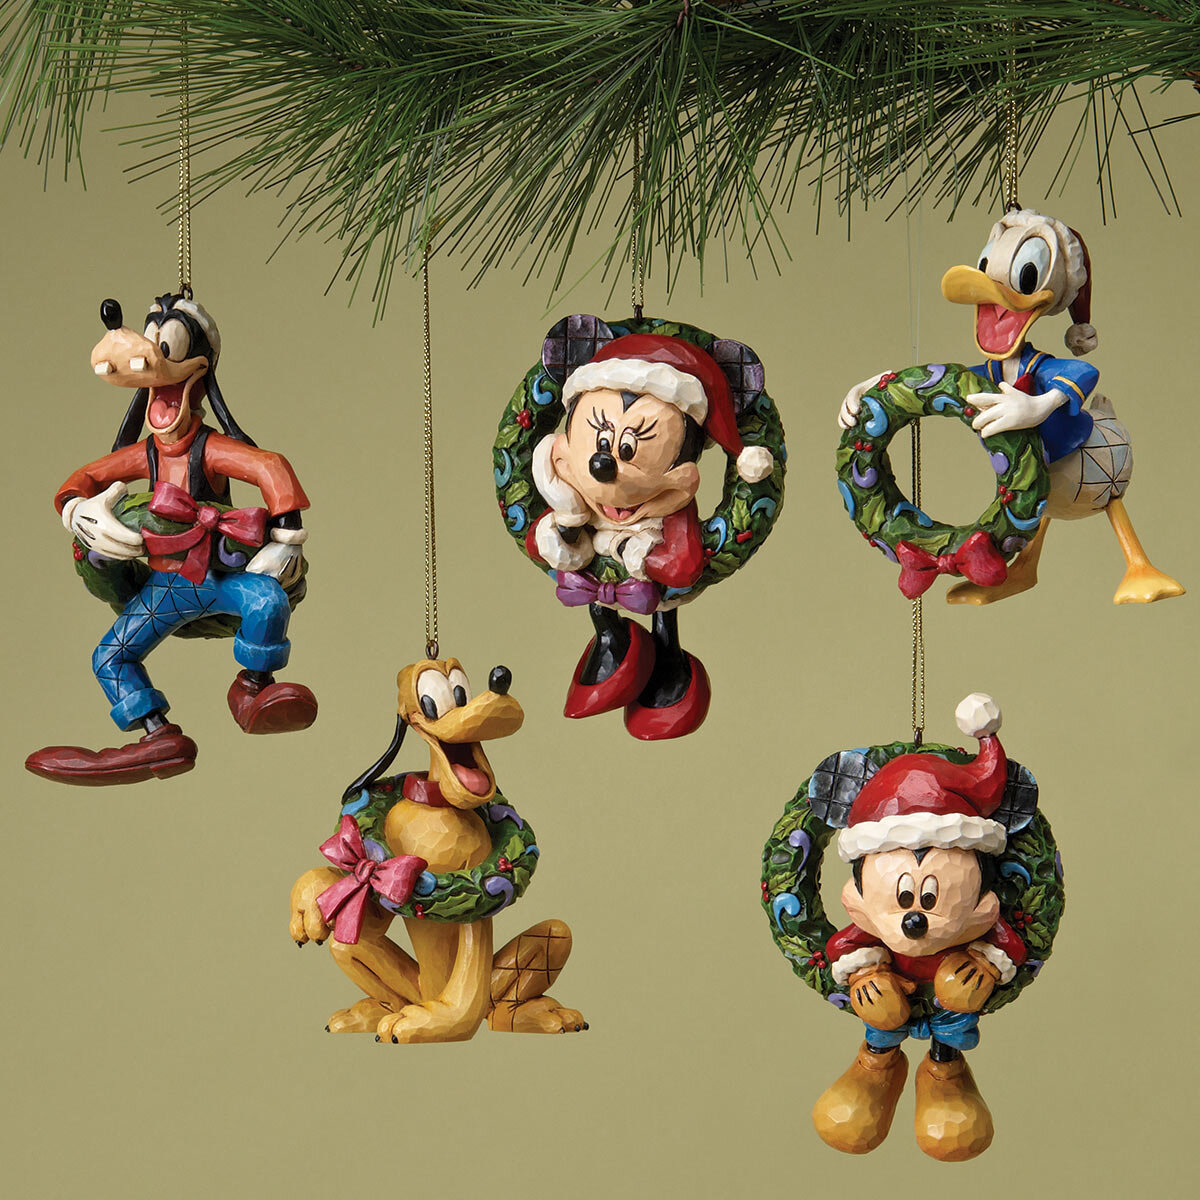 Fab 5 Decorating the Tree - Disney Traditions